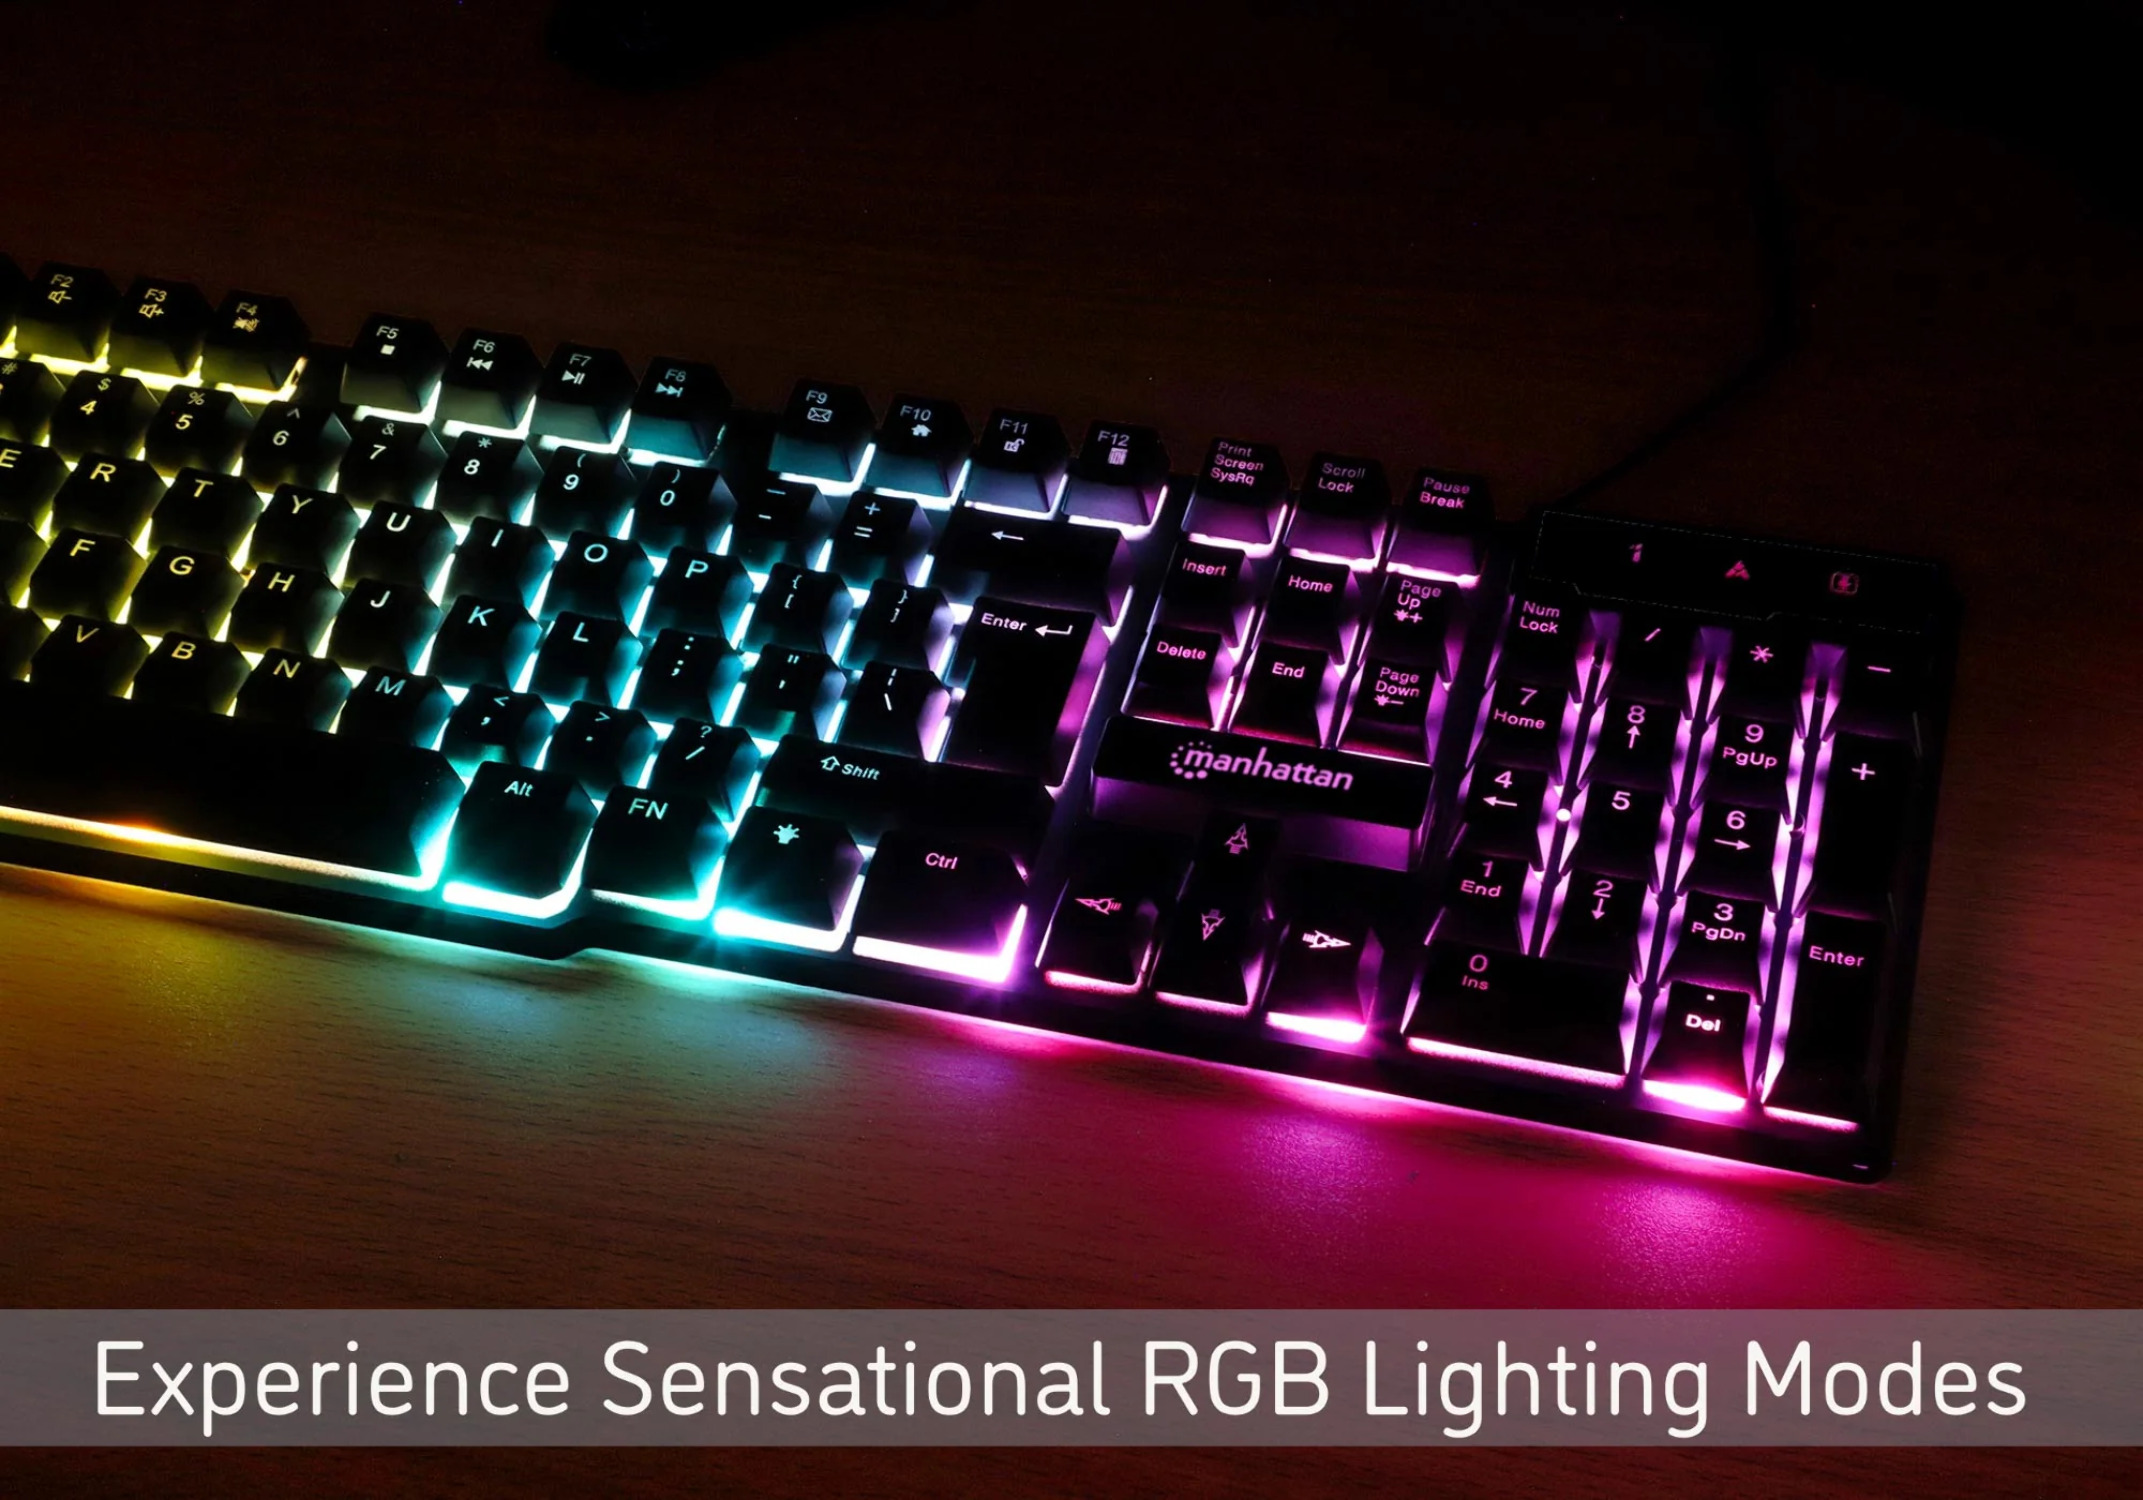 Manhattan Wired USB Gaming Keyboard – With Backlit RGB LED, Quiet Keystrokes - For Computer, PC, Desktop, Gamer - image 4 of 11